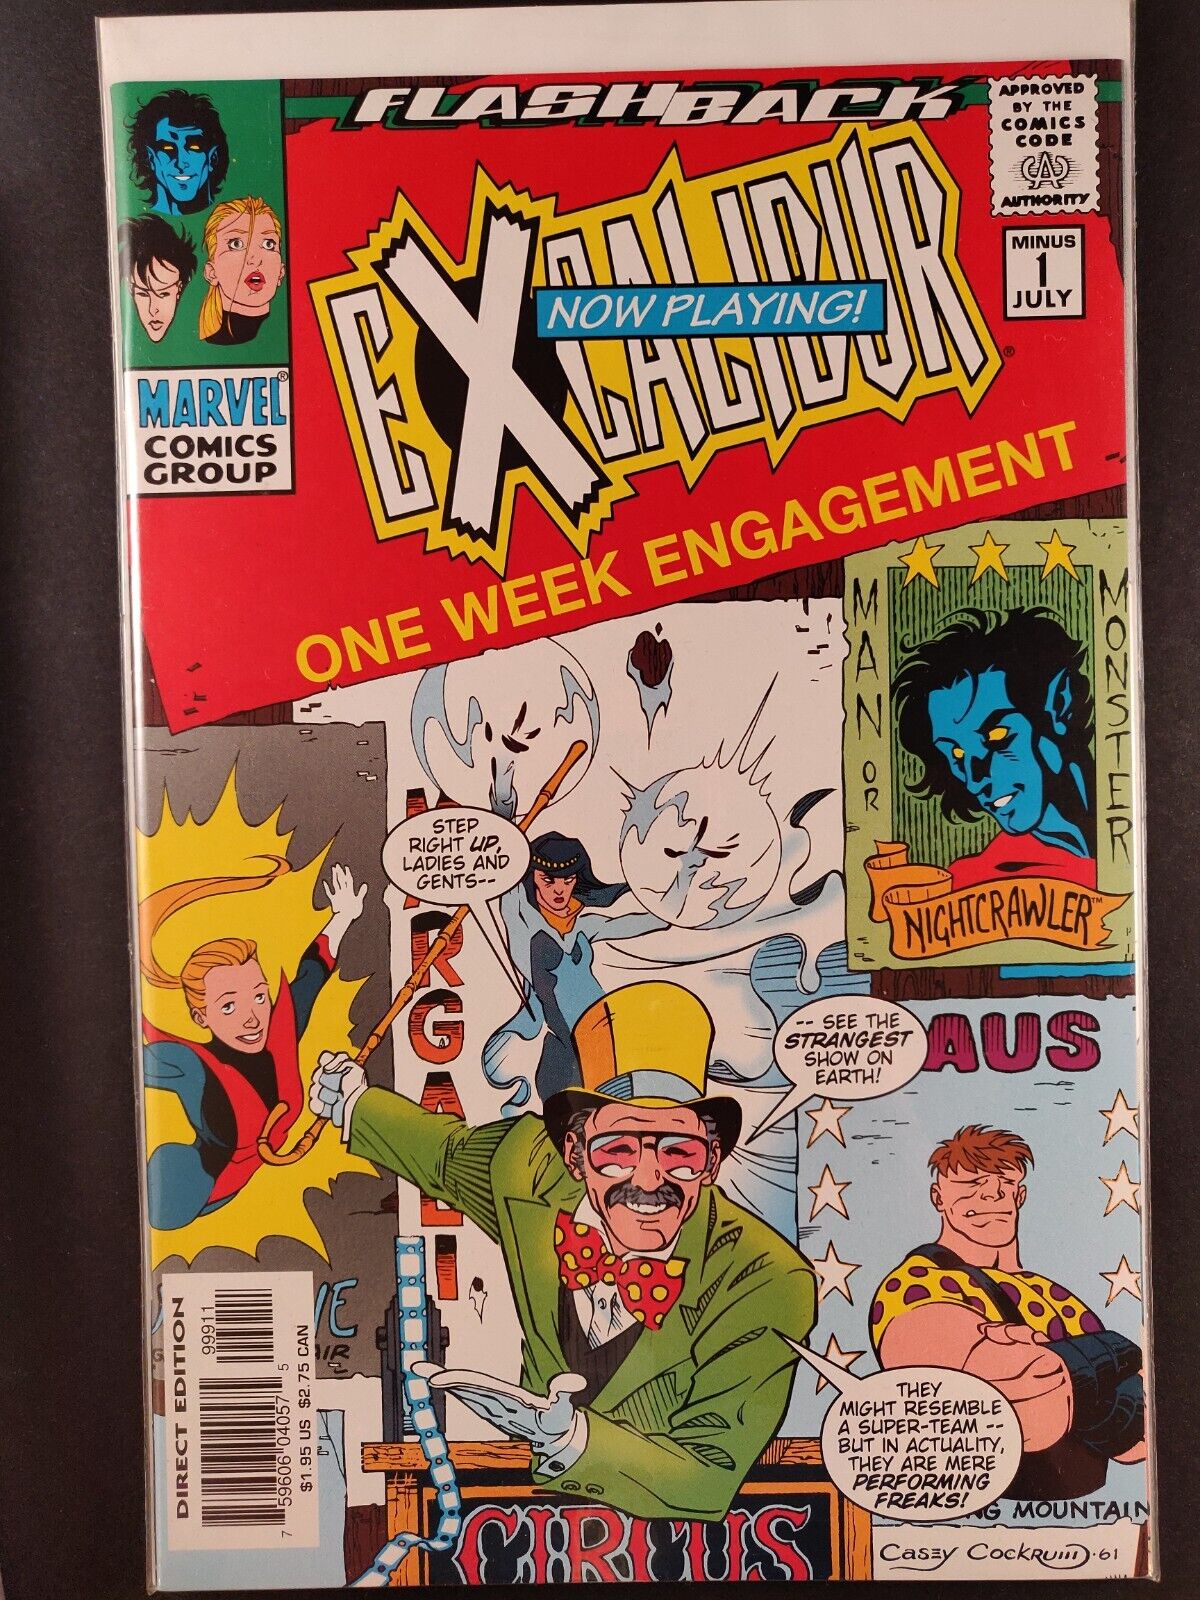 EXCALIBUR (Marvel 1988) You Pick Issue #1 to 125 + ANNUALS Finish Your Run